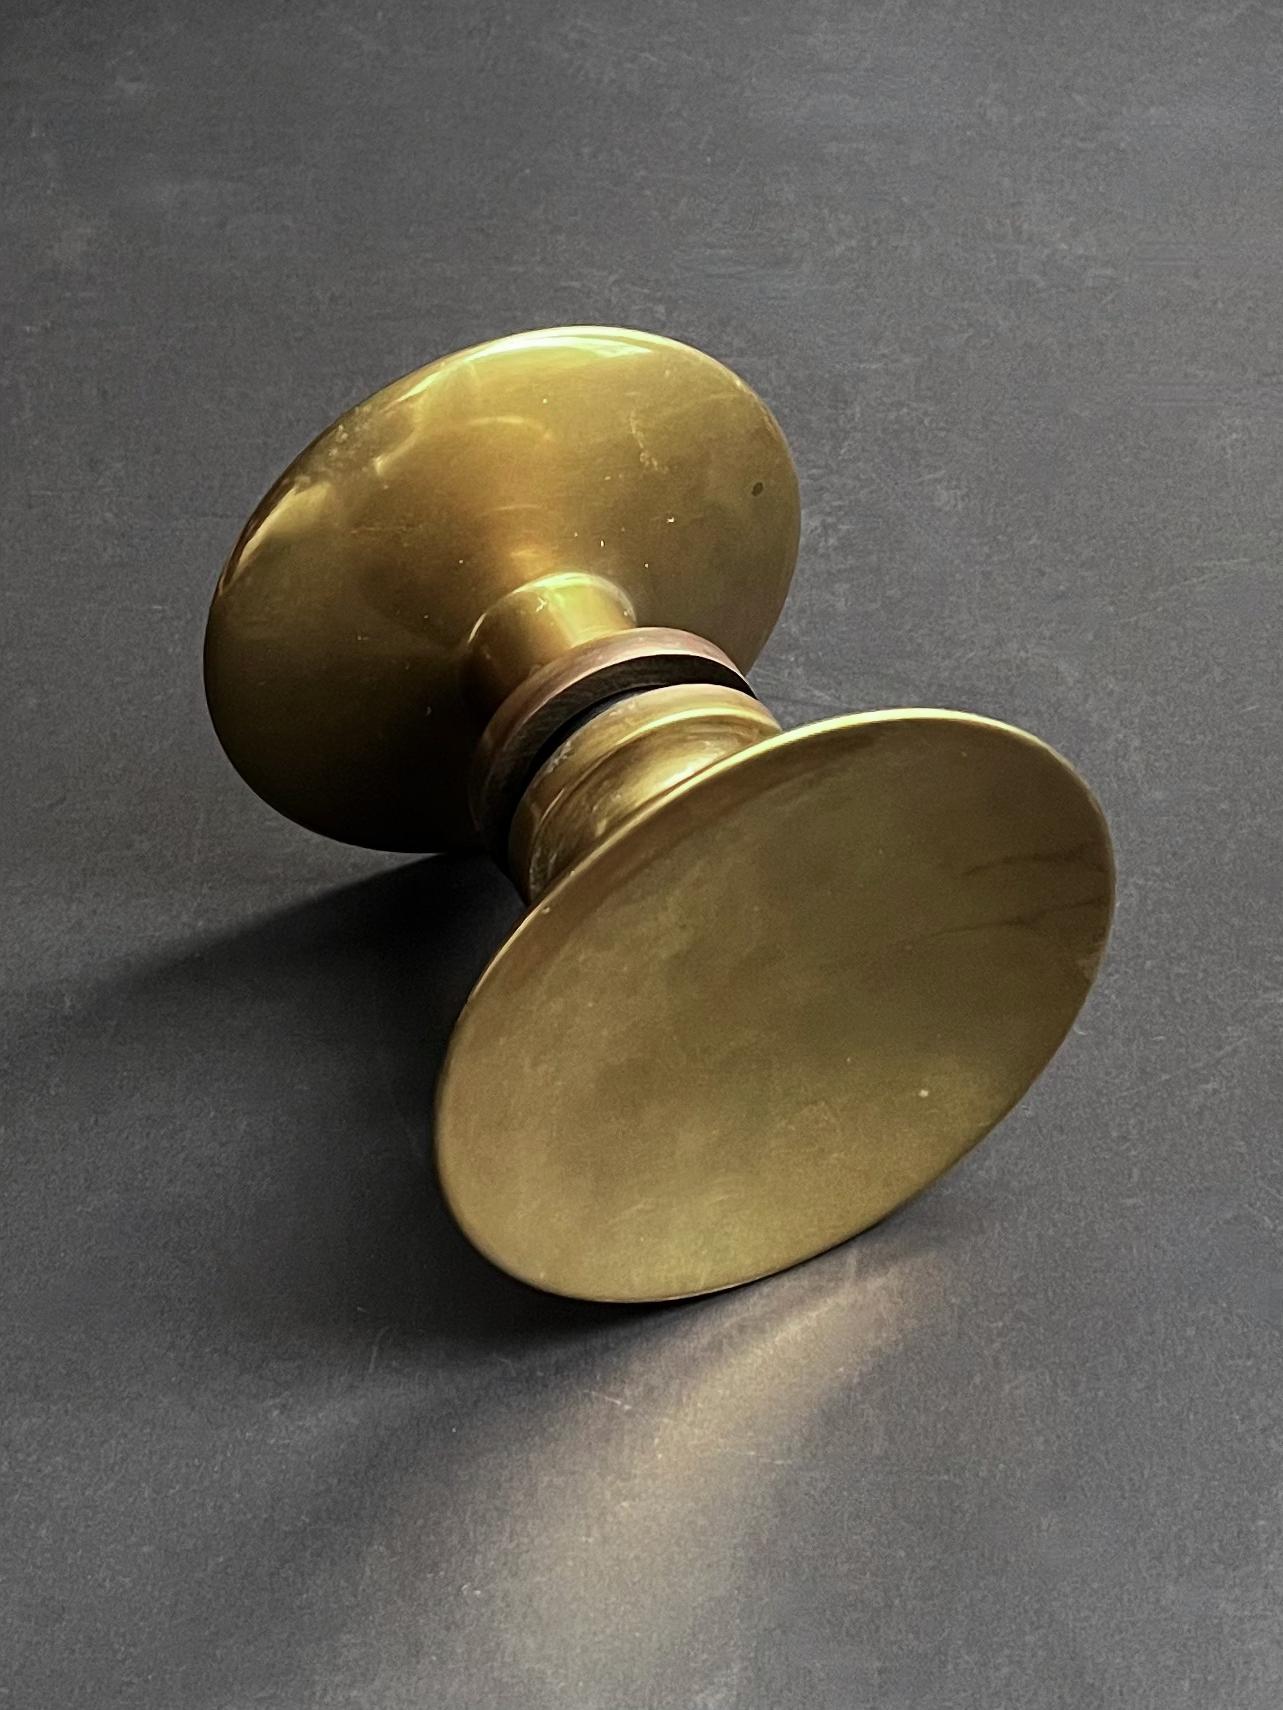 Circular push-and-pull door handle in bronze, mid-20th century, France.

A simple elegant handle, made up of two separate round pieces; each side with a slightly concave dish and wide stem. The components are in good vintage condition with signs of